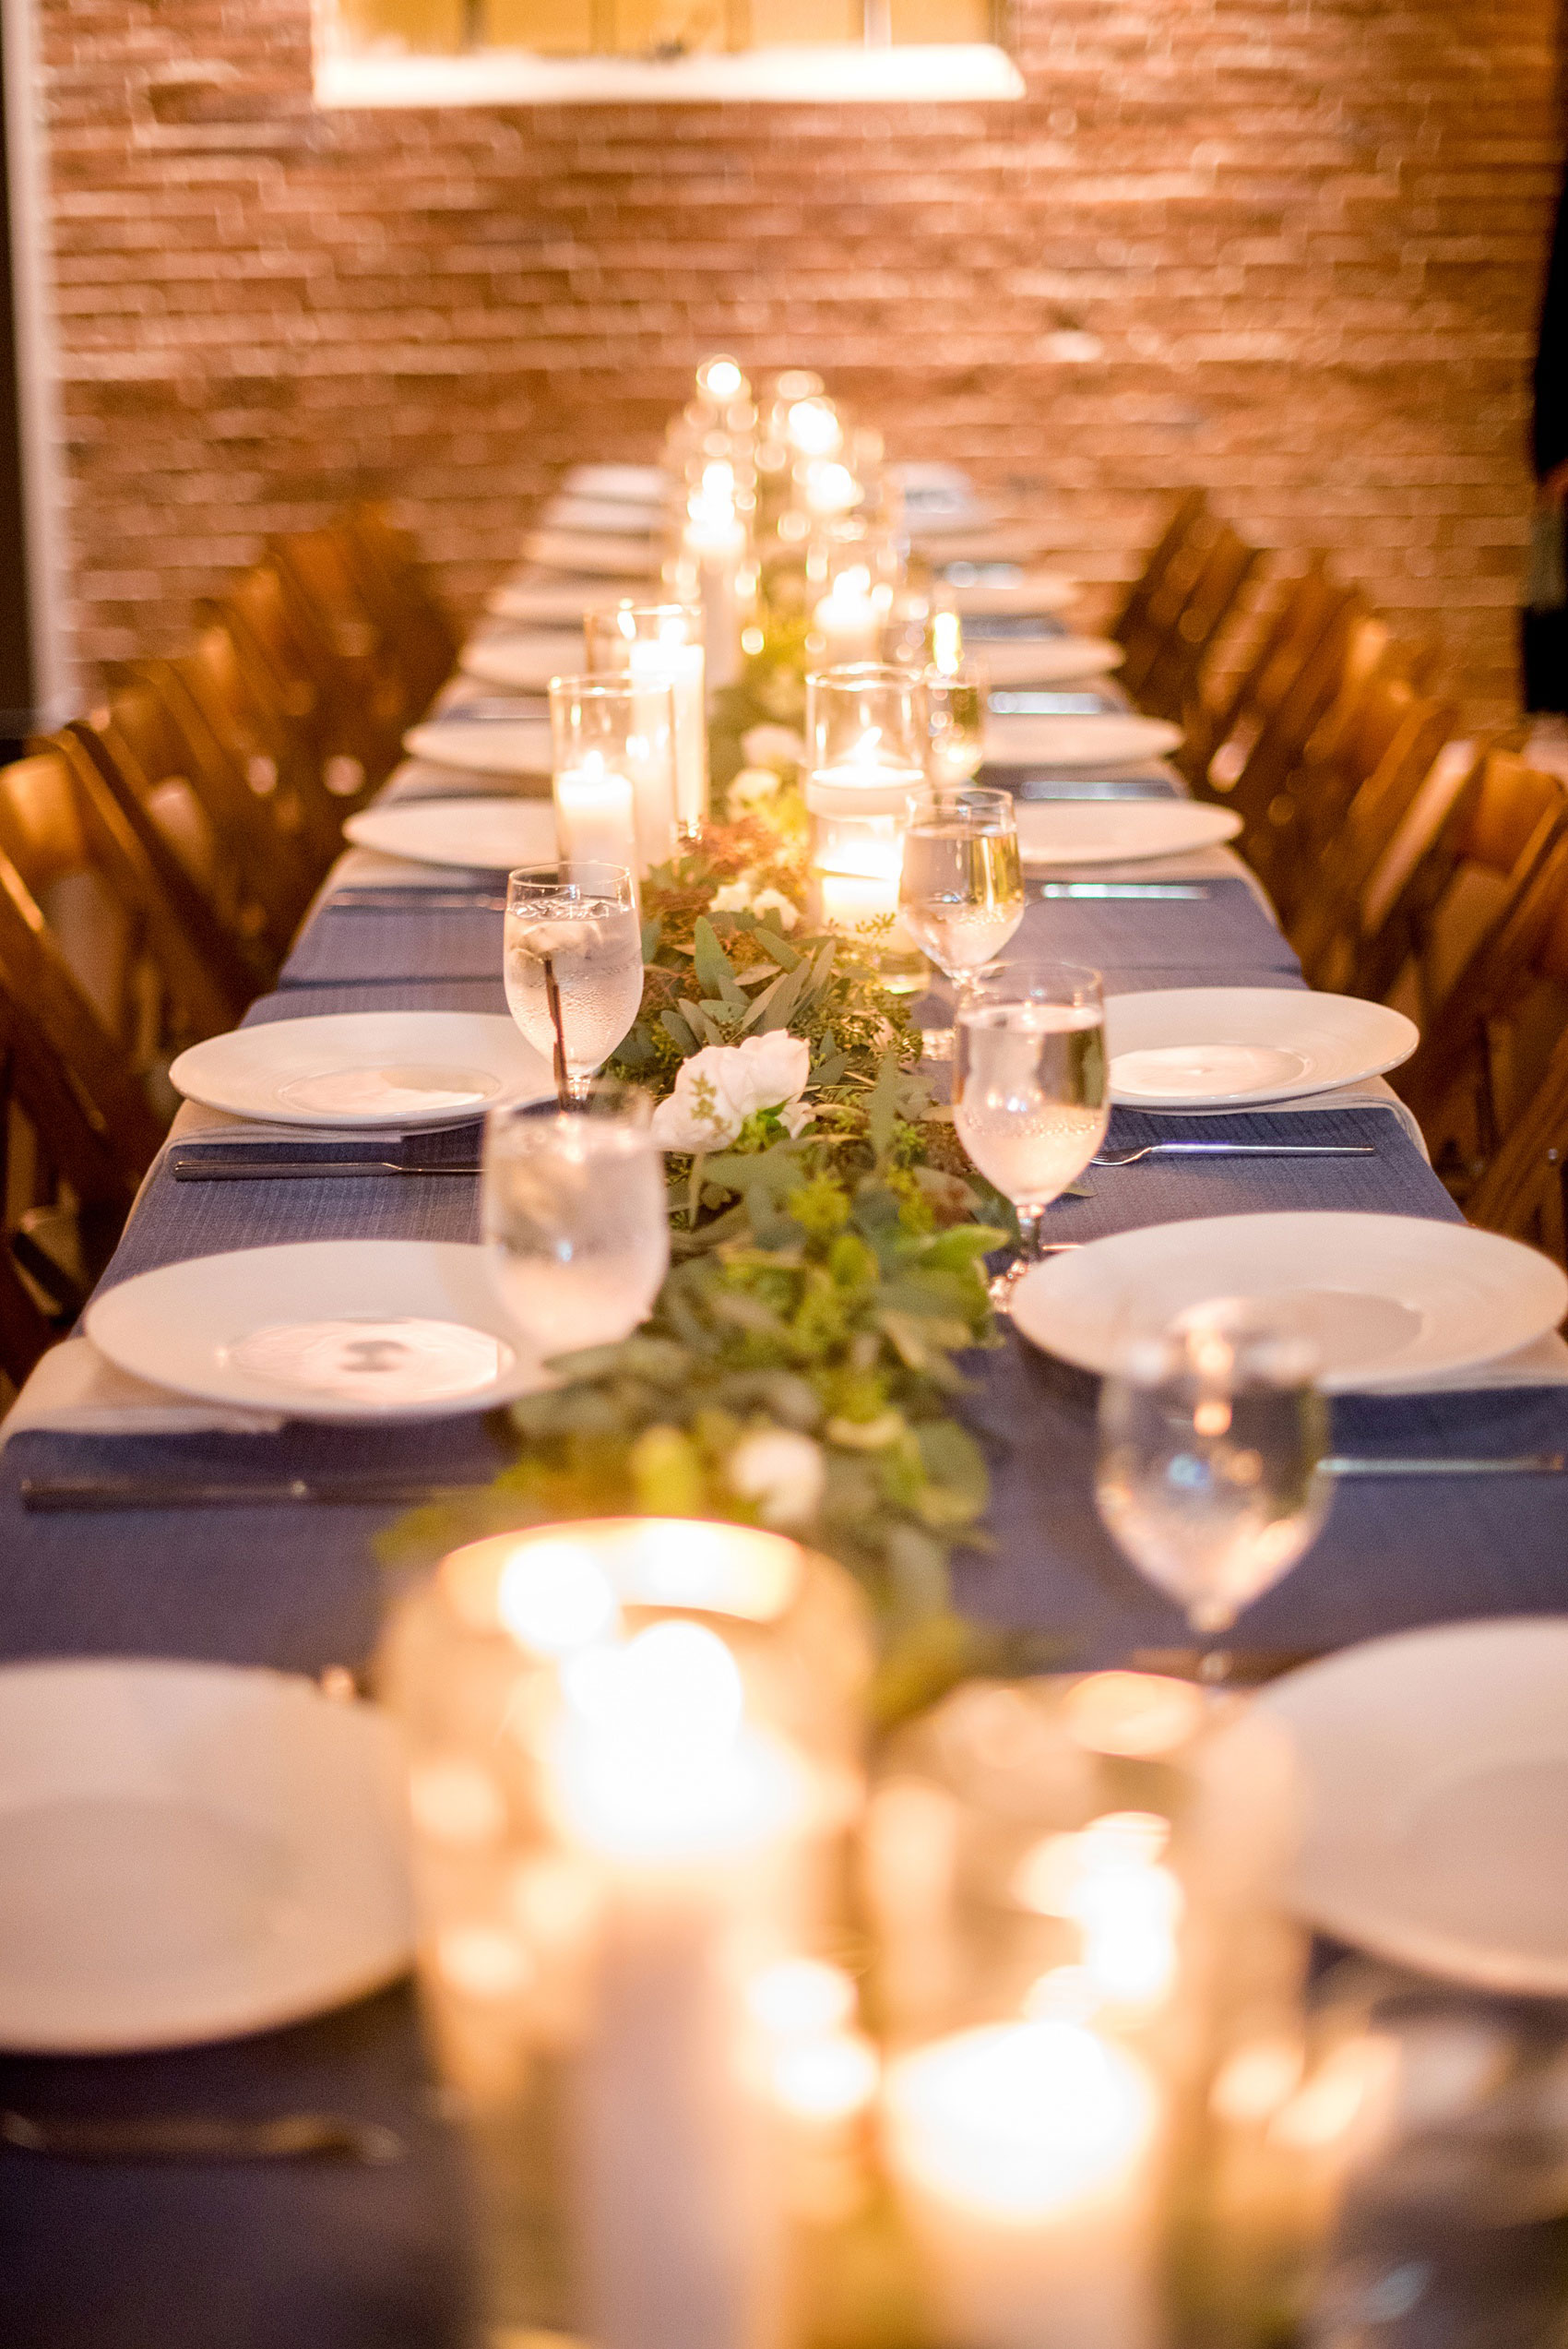 Durham wedding photos at The Cookery by Mikkel Paige Photography in North Carolina. The reception room had white and blue linens and lots of candlelight.